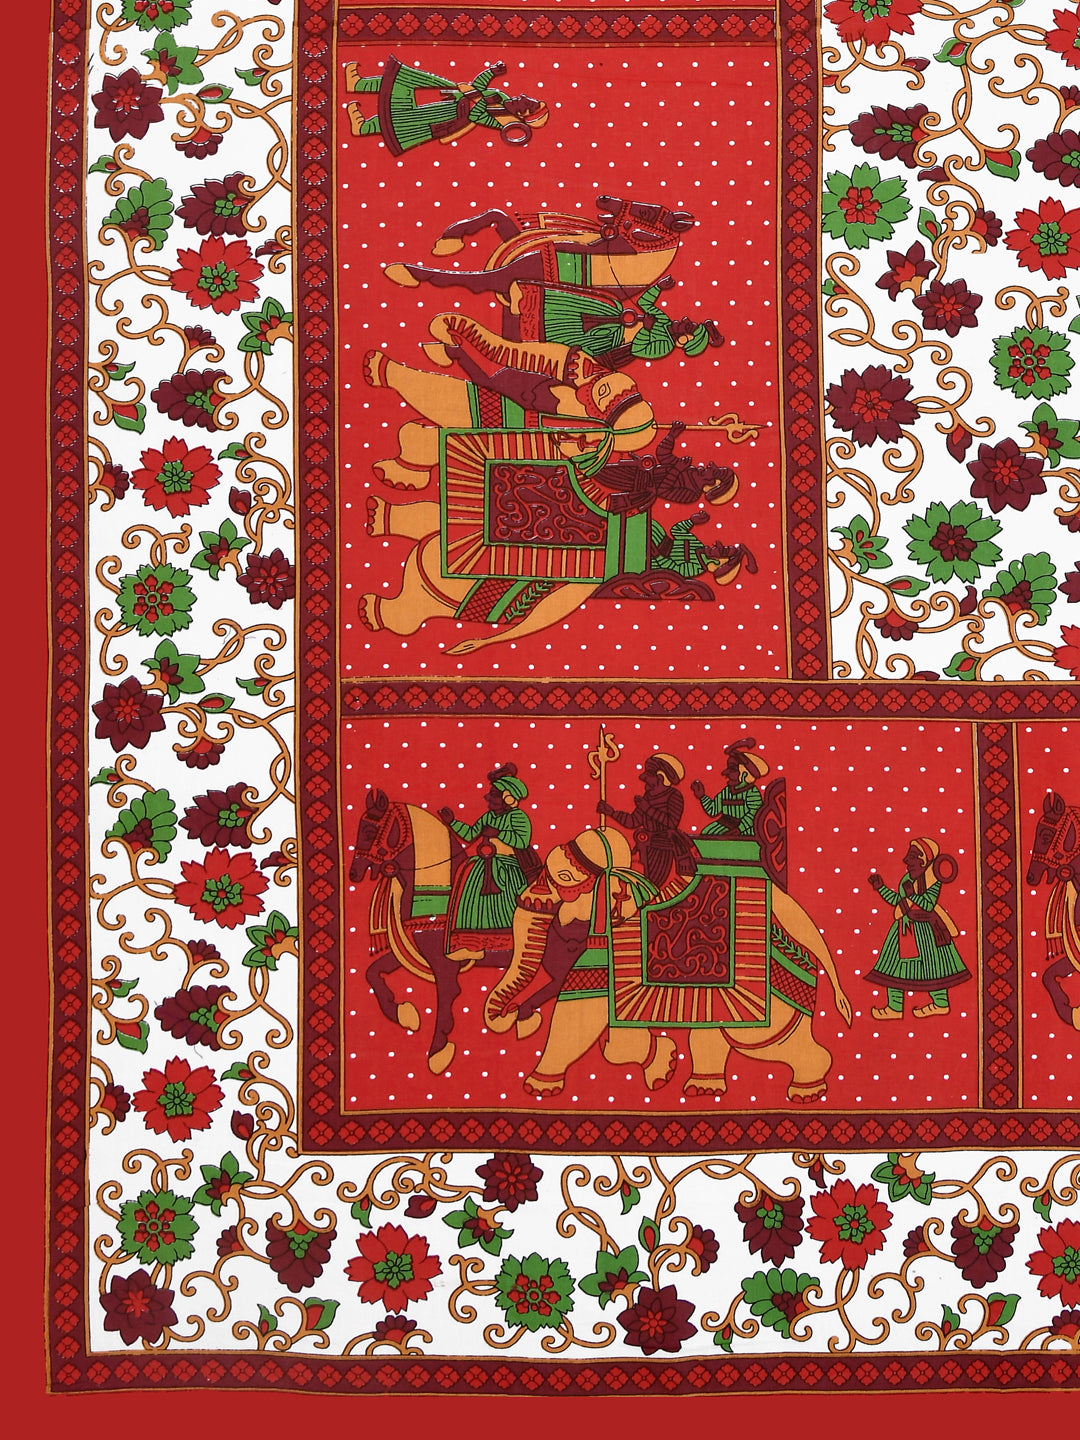 LIVING ROOTS Single Bed Bedsheet Pure Cotton Fabric Size  60*90 Sanganeri Print Red Colour (30-012-C)